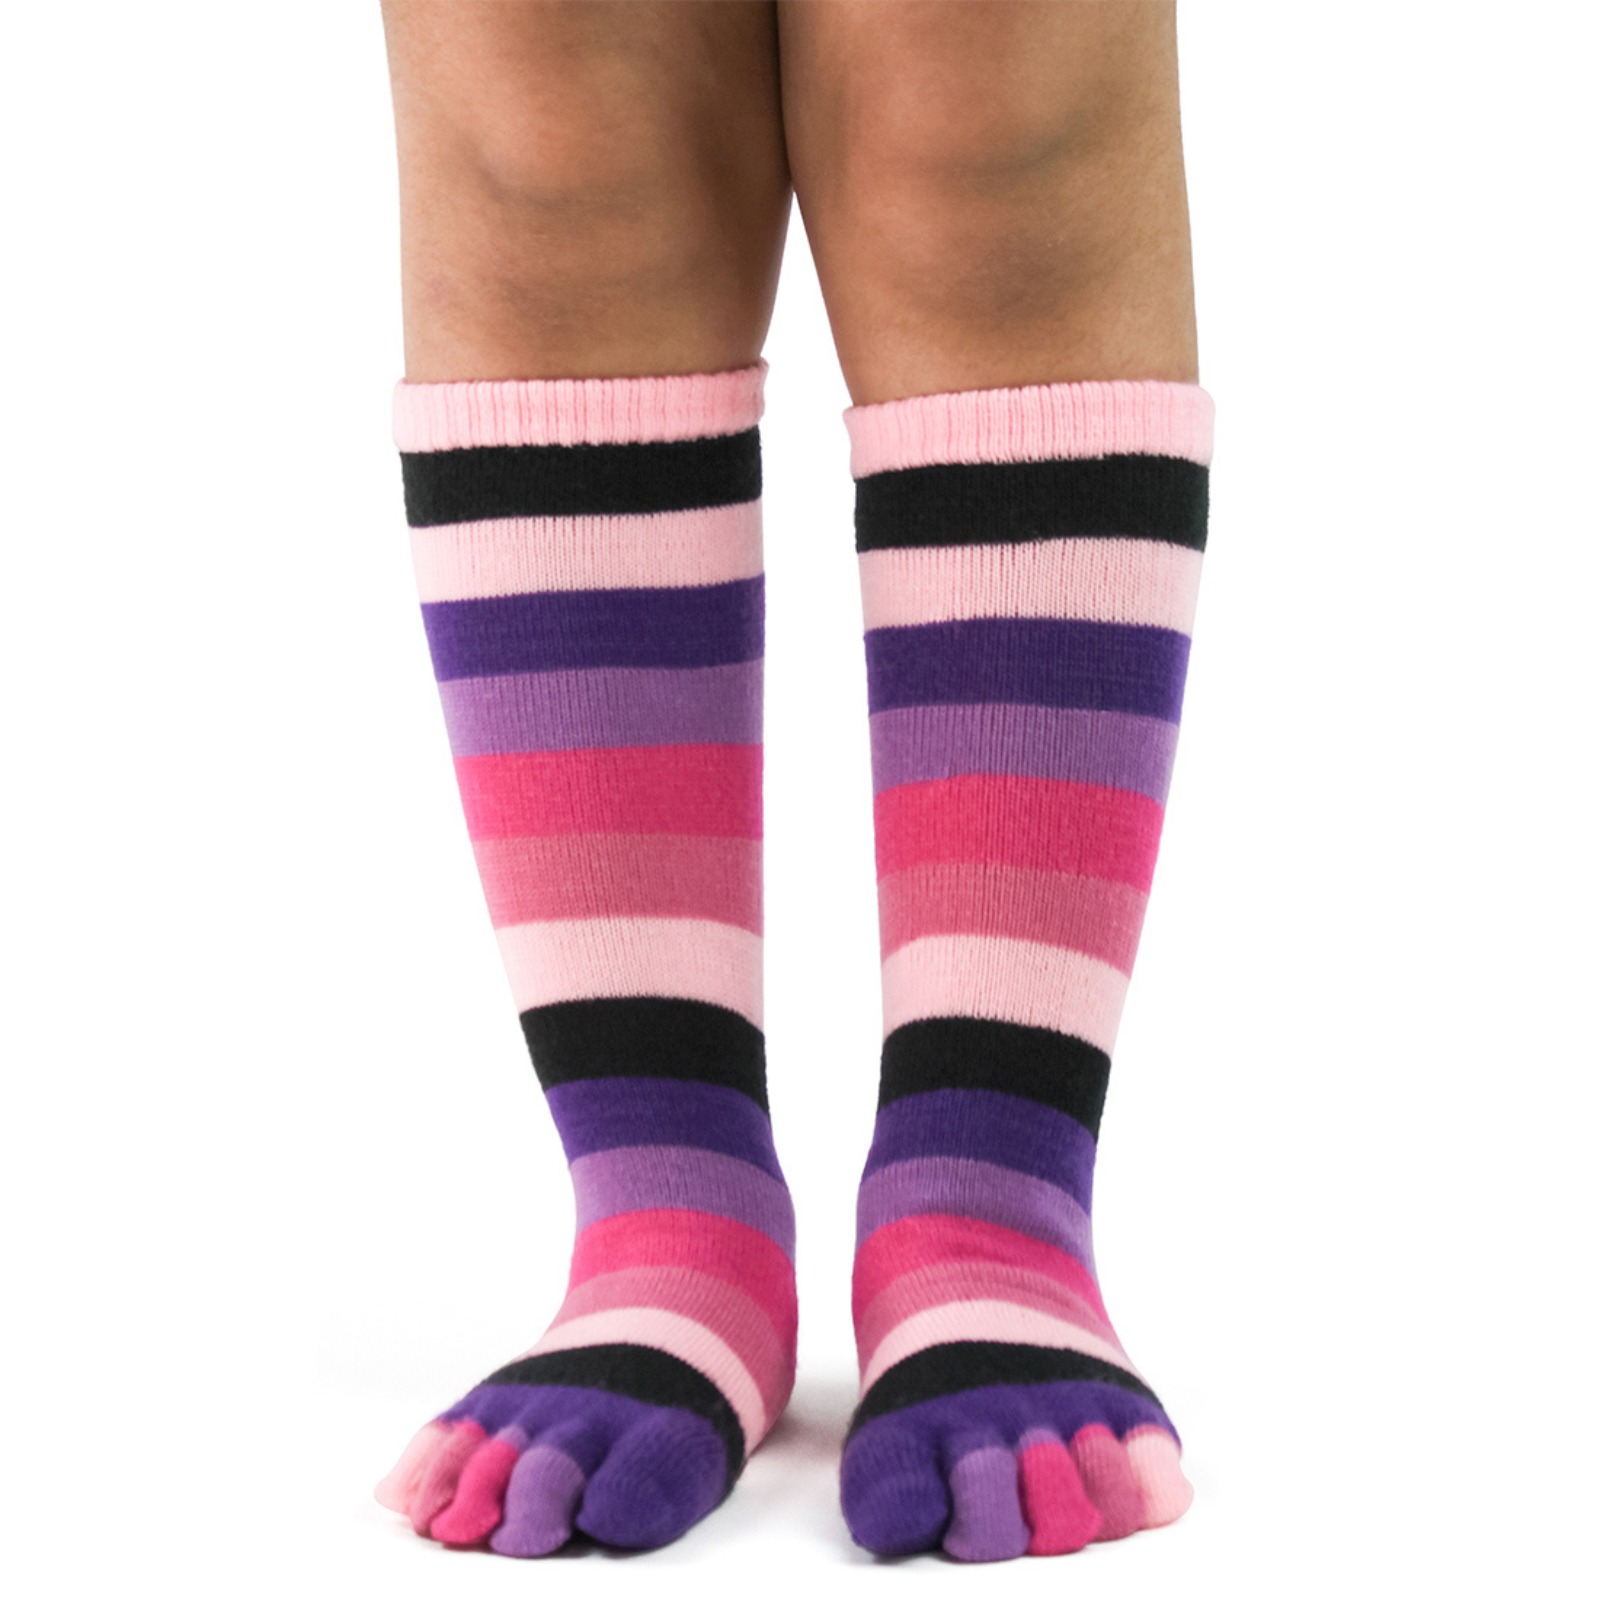 Foot Traffic Pink Stripe knee high Toe Socks kids' featuring shades of pink and purple stripes worn by model from front